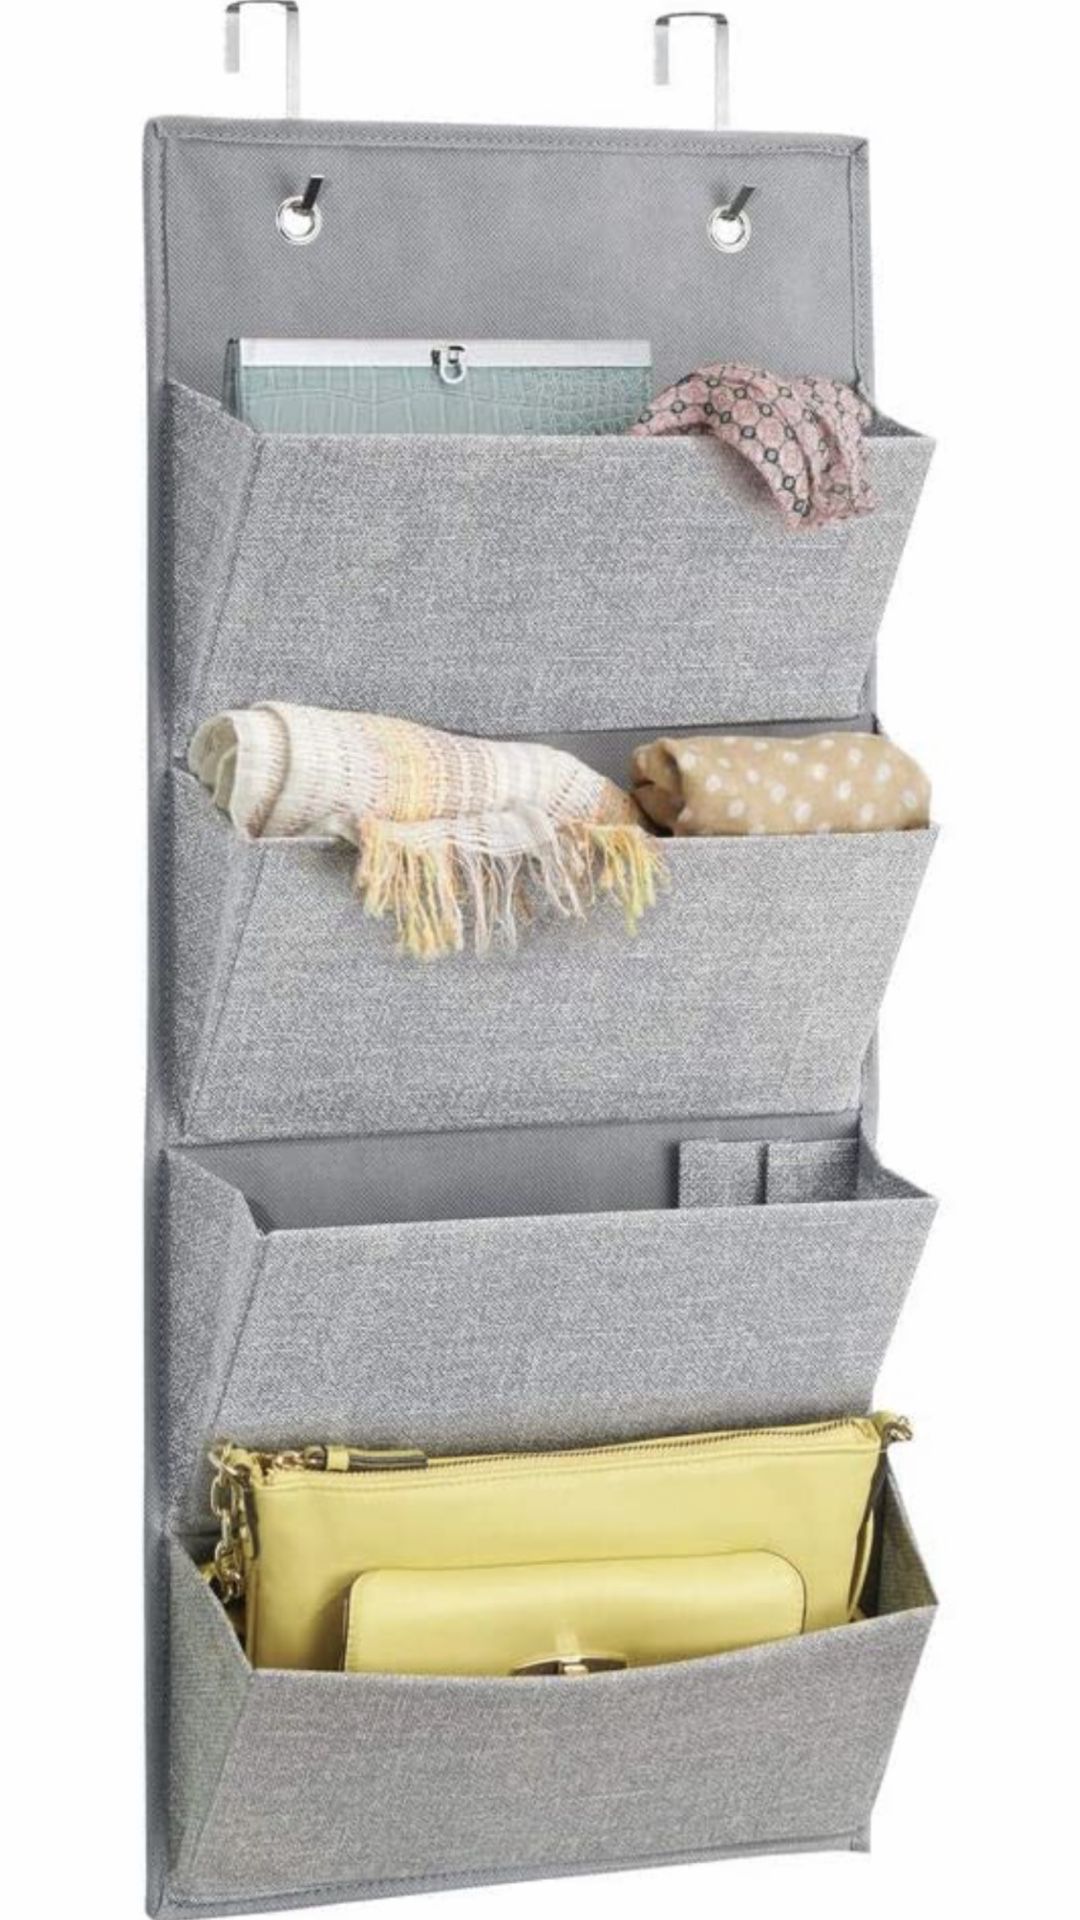 Over The Door Hanging Storage Organizer with 4 Large Pockets for Closets in Bedrooms, Hallway, Entryway, Mudroom - Hooks Included - Textured Print -